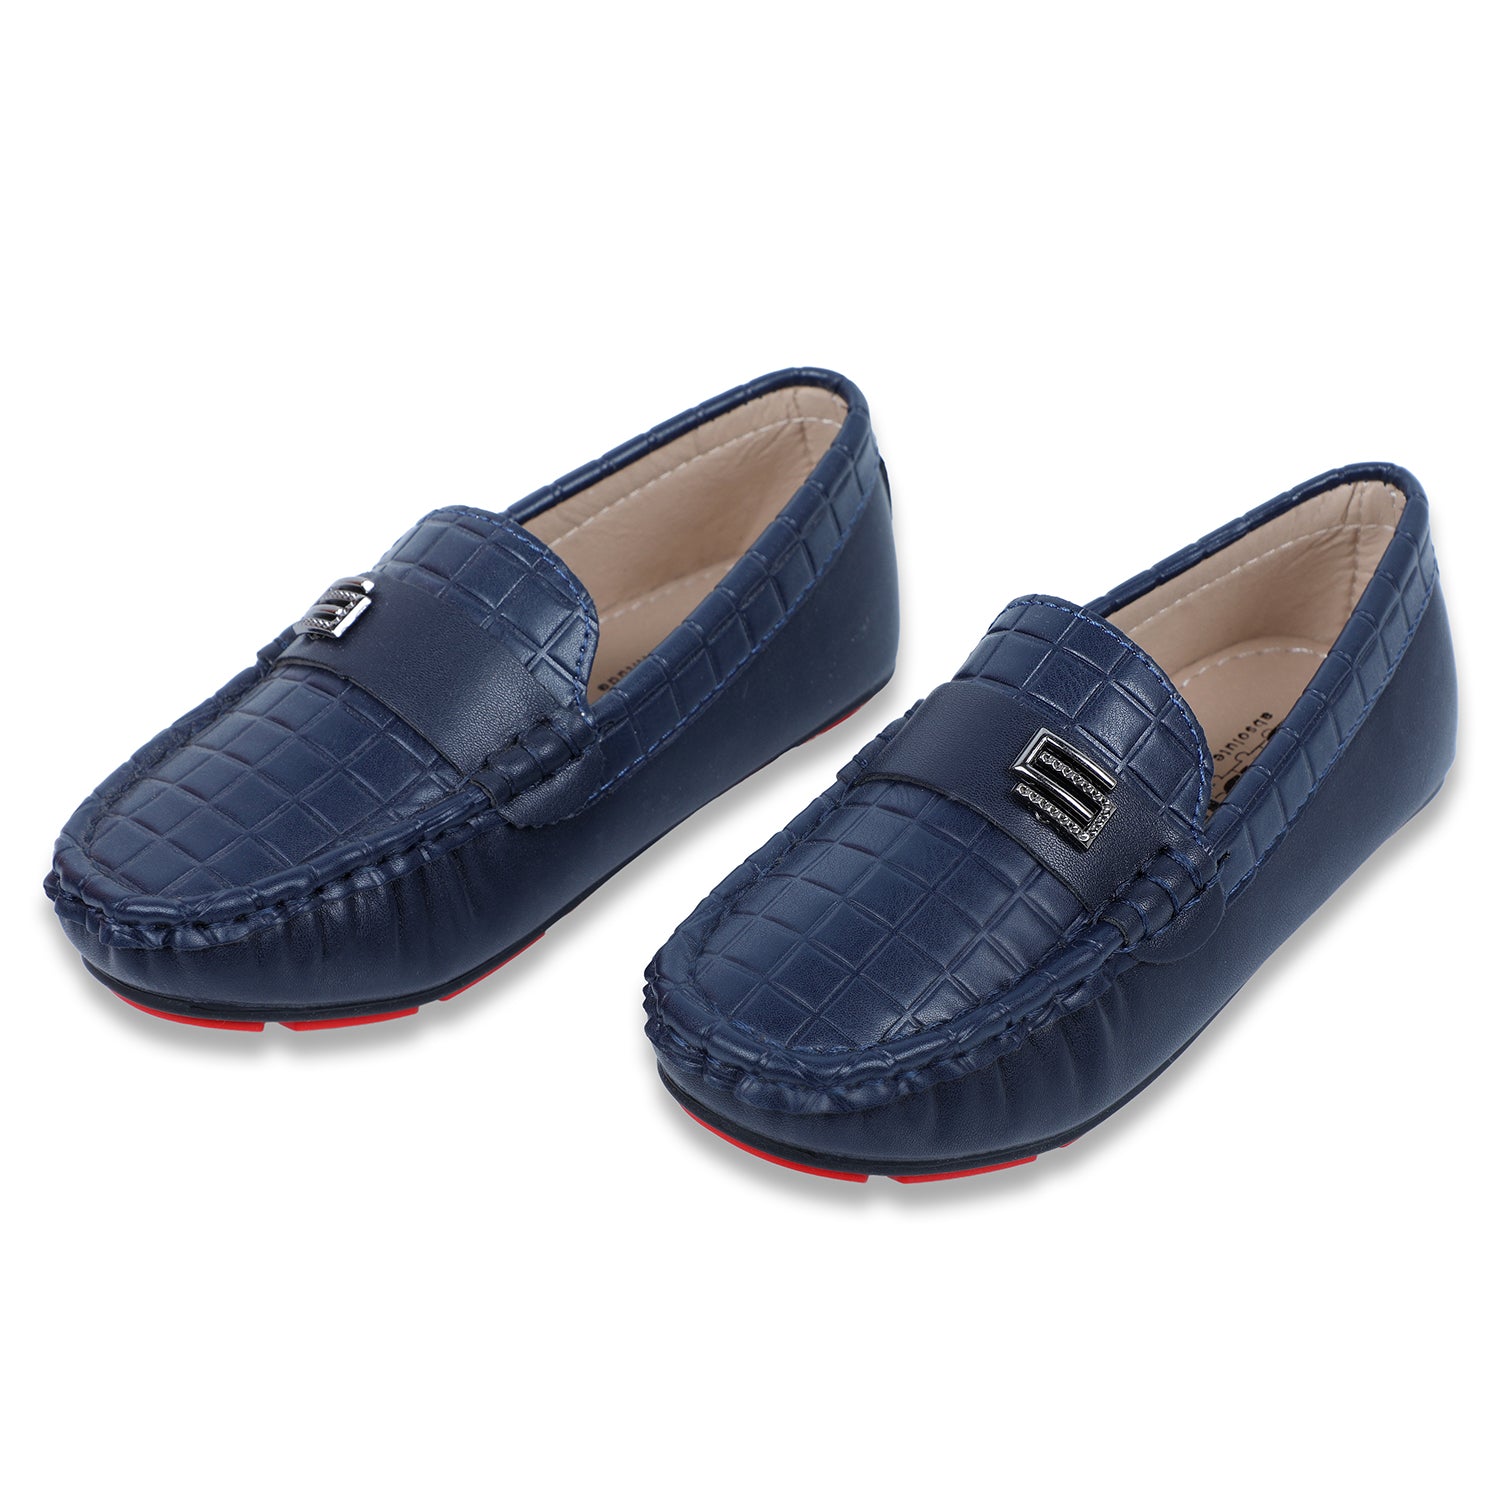 Baby Moo x Bash Kids Embossed Leatherite Loafer Shoes - Navy Blue